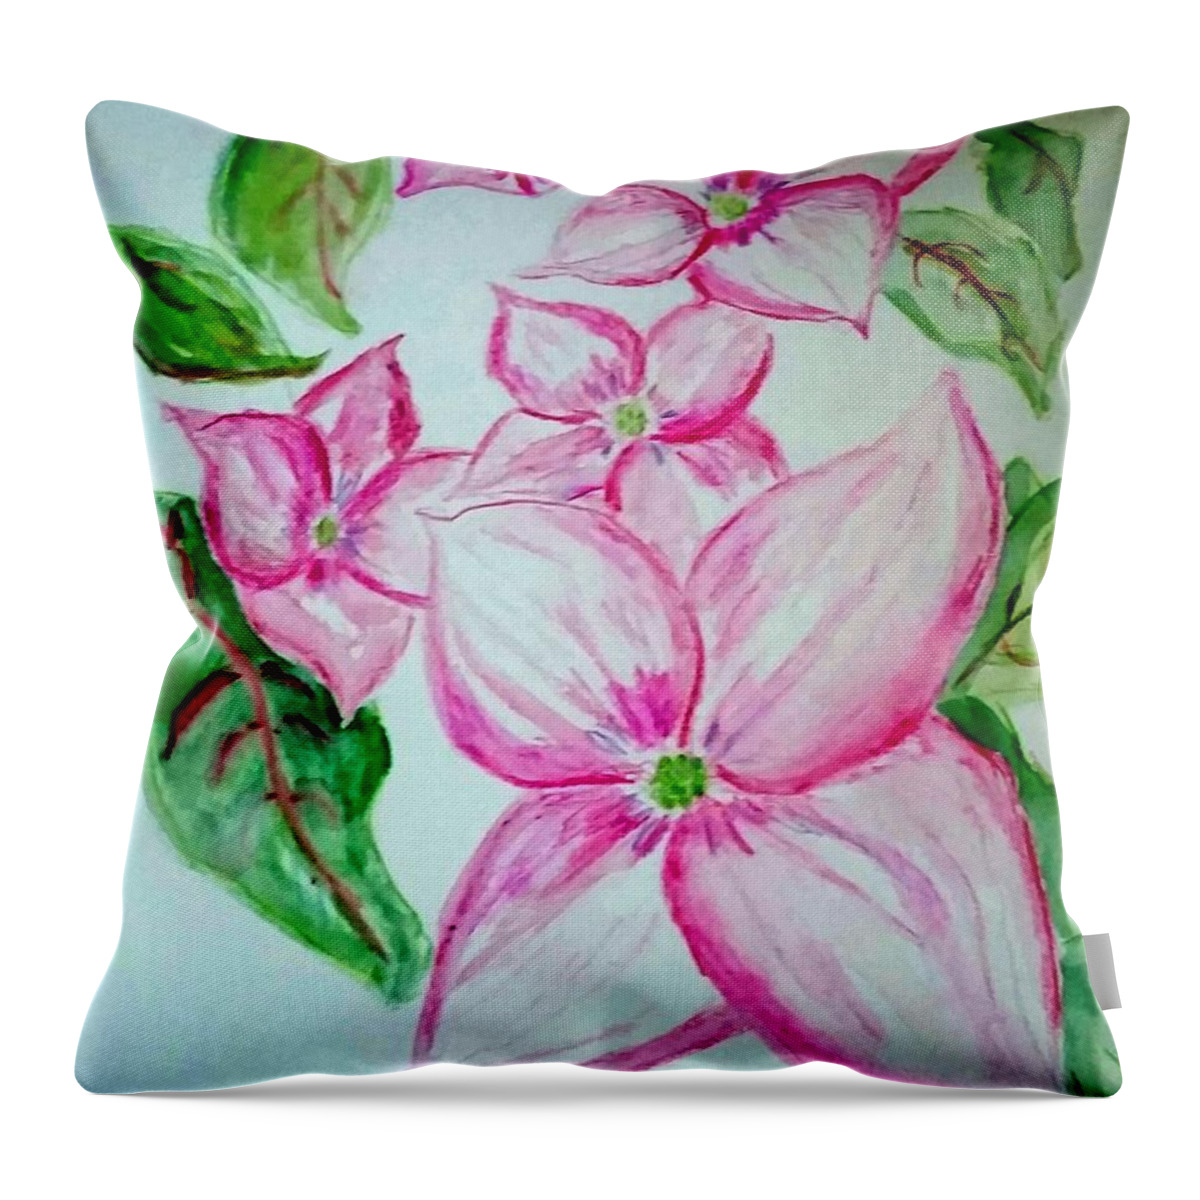 Watercolor Throw Pillow featuring the painting Rosy Teacups Dogwood Painting by Stacie Siemsen